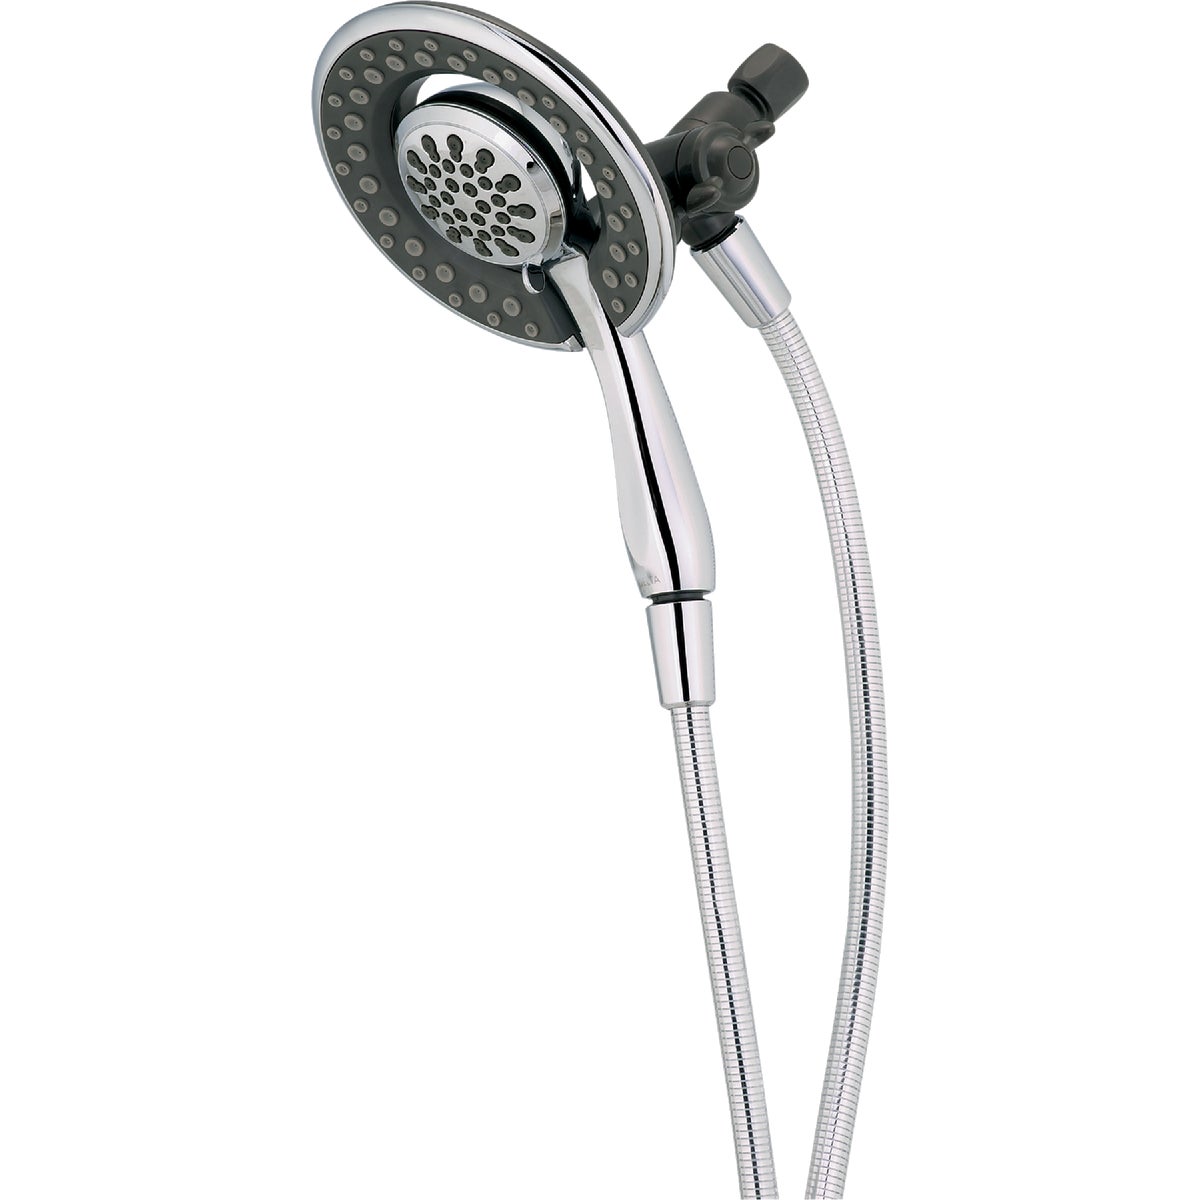 Delta In2ition 4-Spray 1.8 GPM Combo Handheld Shower & Showerhead, Chrome